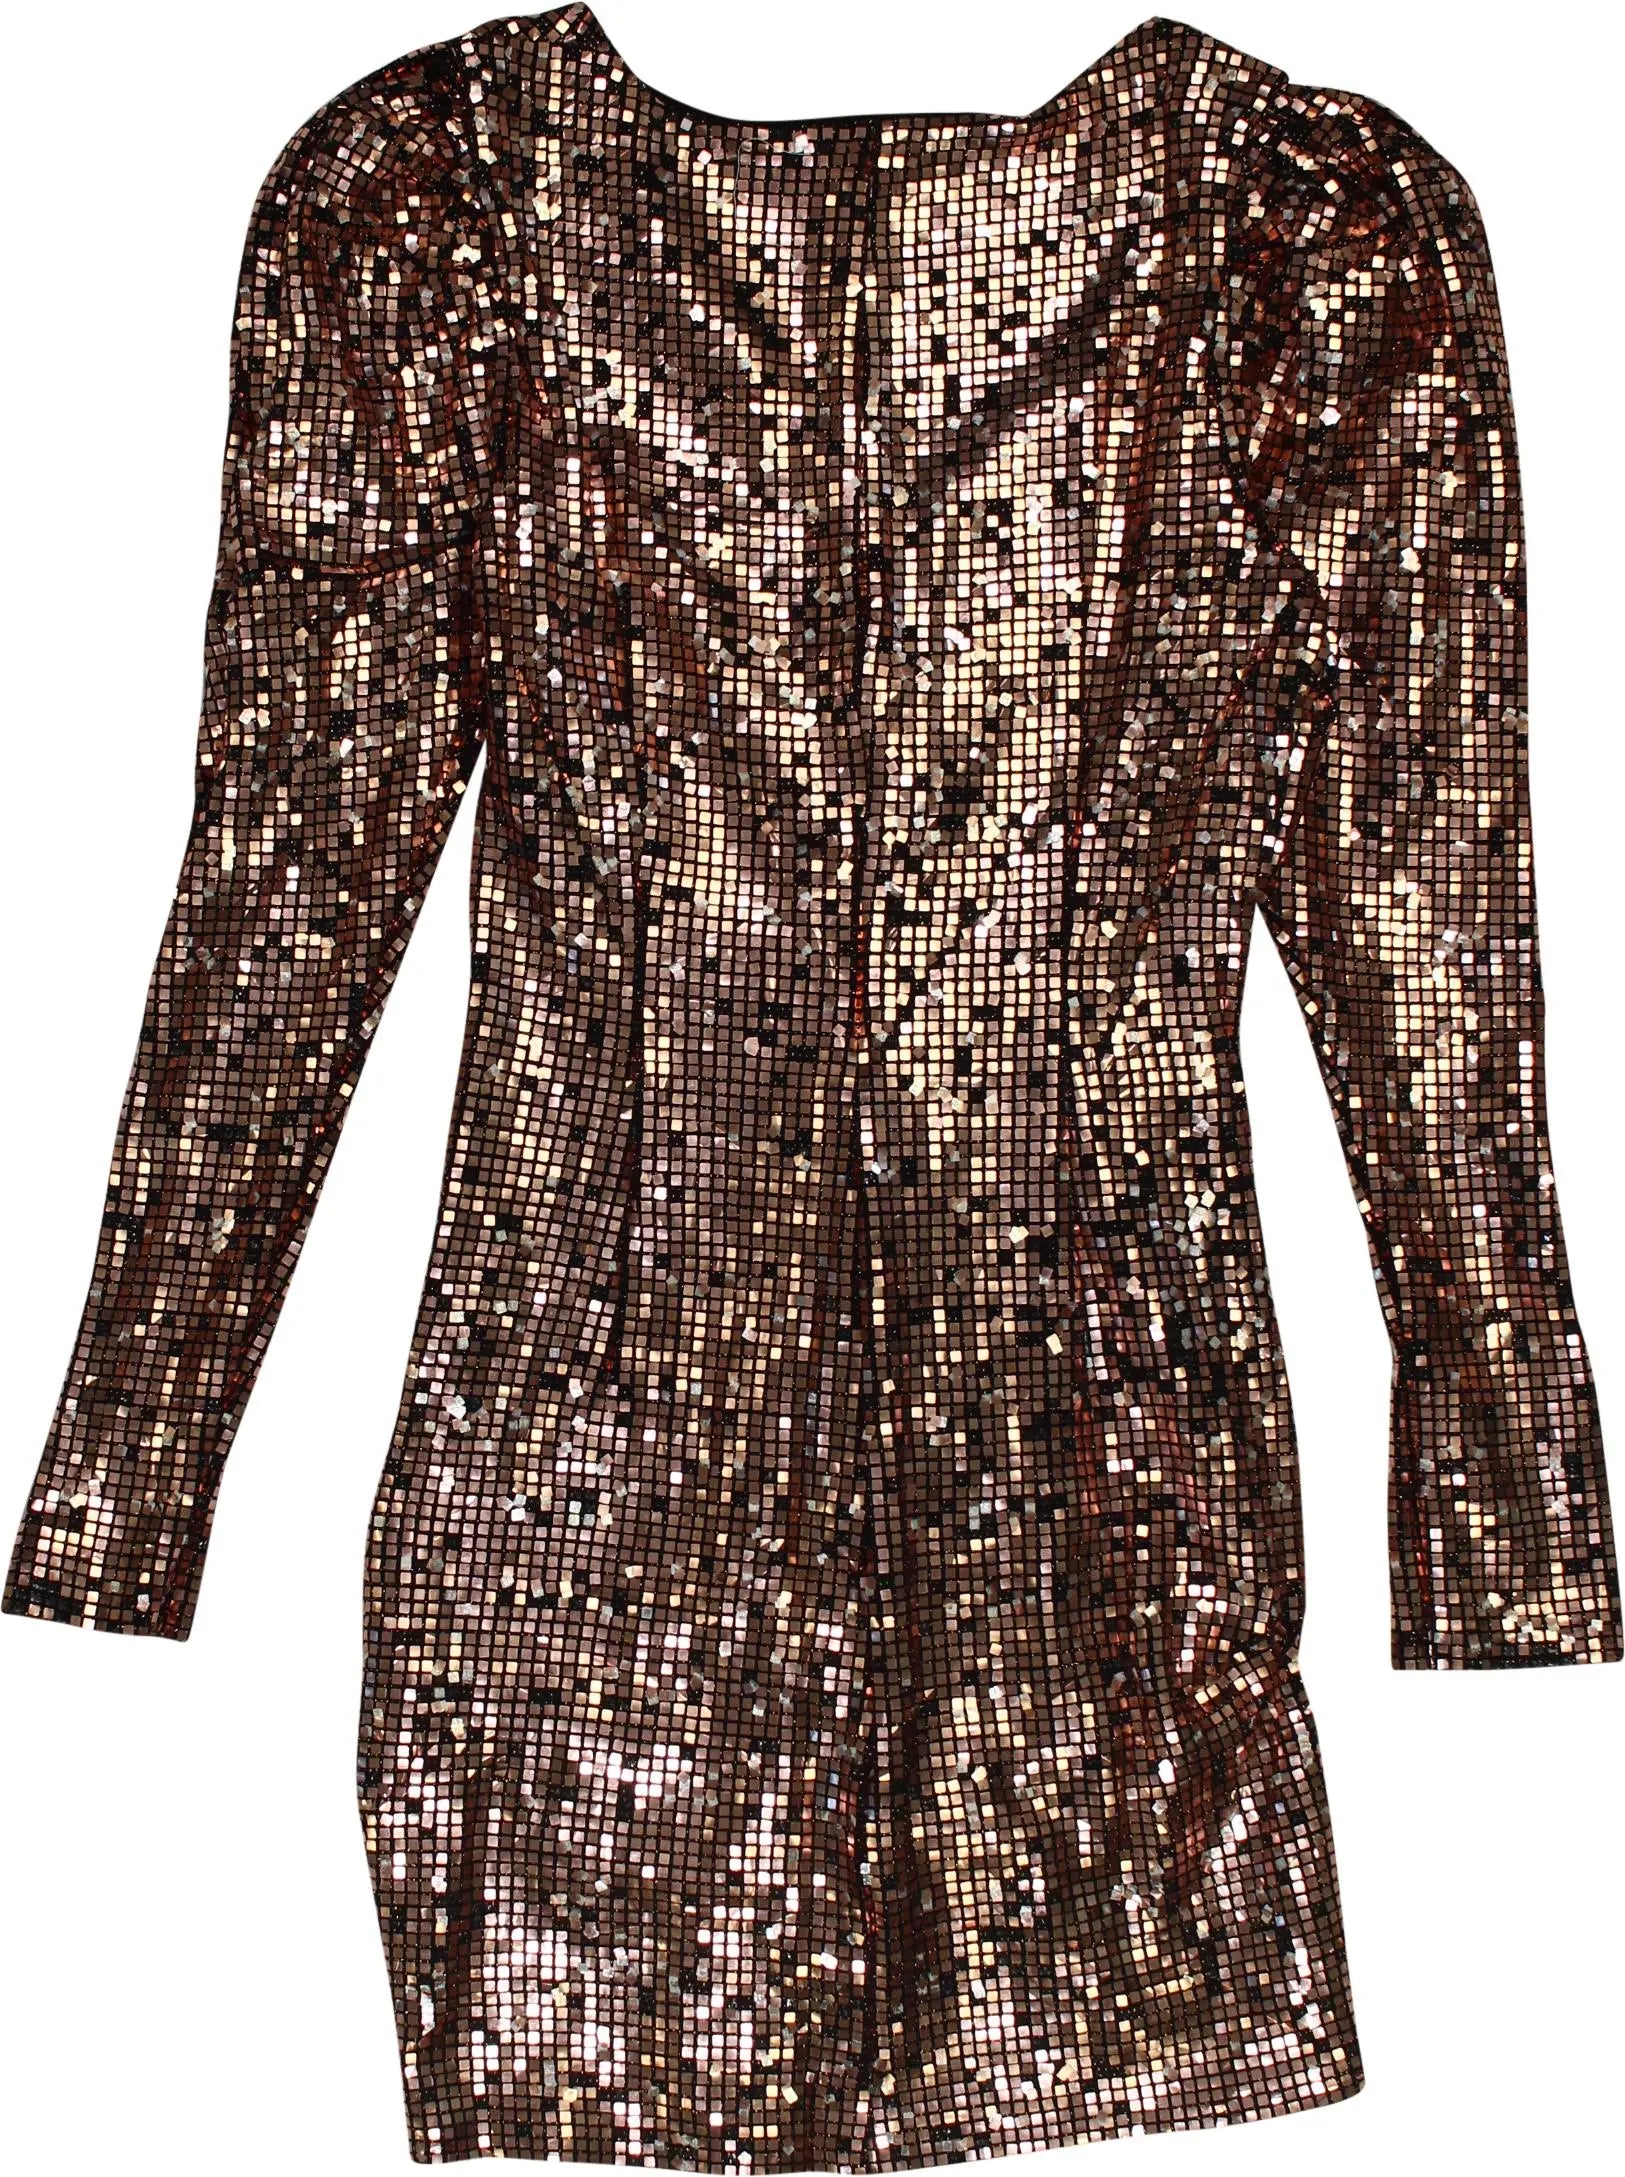 Zara - Sequined Dress- ThriftTale.com - Vintage and second handclothing